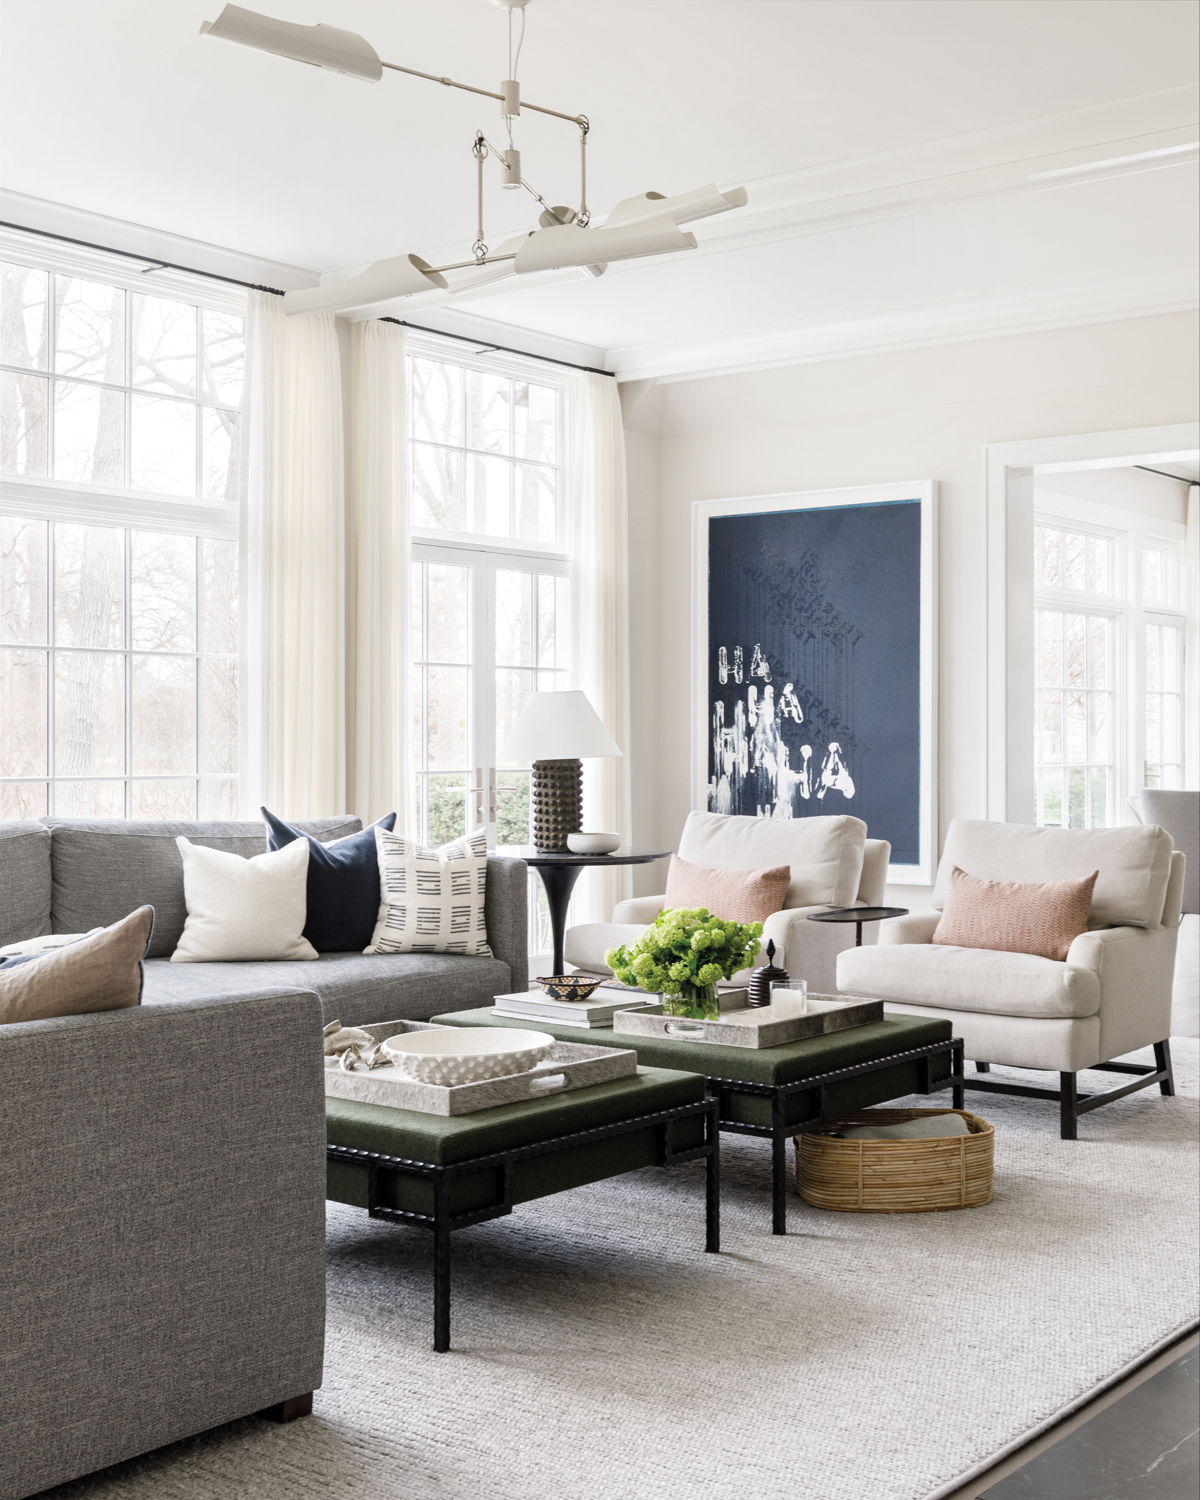 Plush Textures + Soft Colors Fill A Contemporary Chicago Home